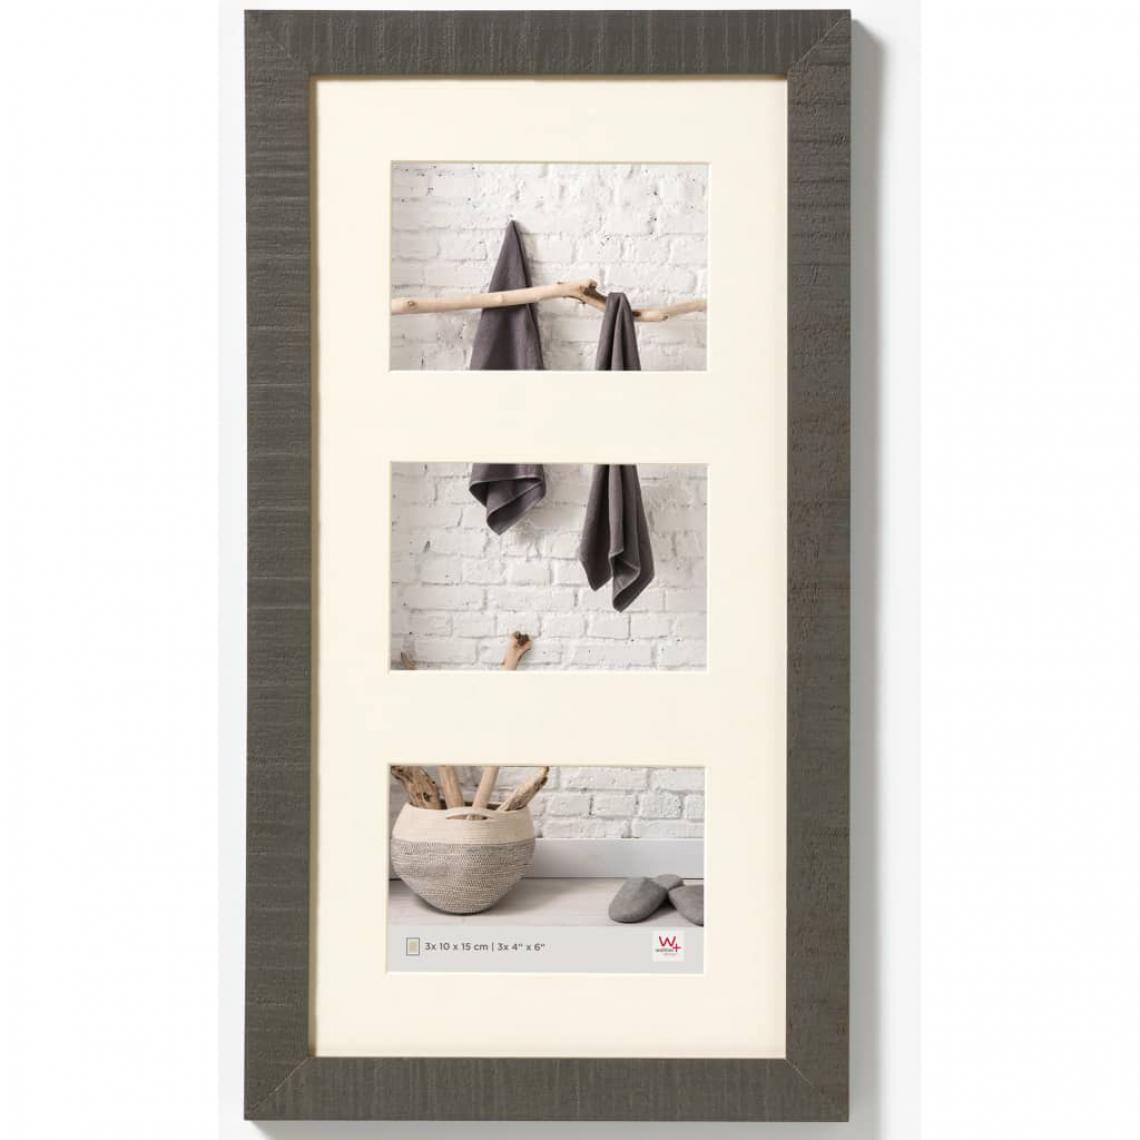 Walther - Walther Design Cadre photo Home 3x10x15 cm Gris - Cadres, pêle-mêle